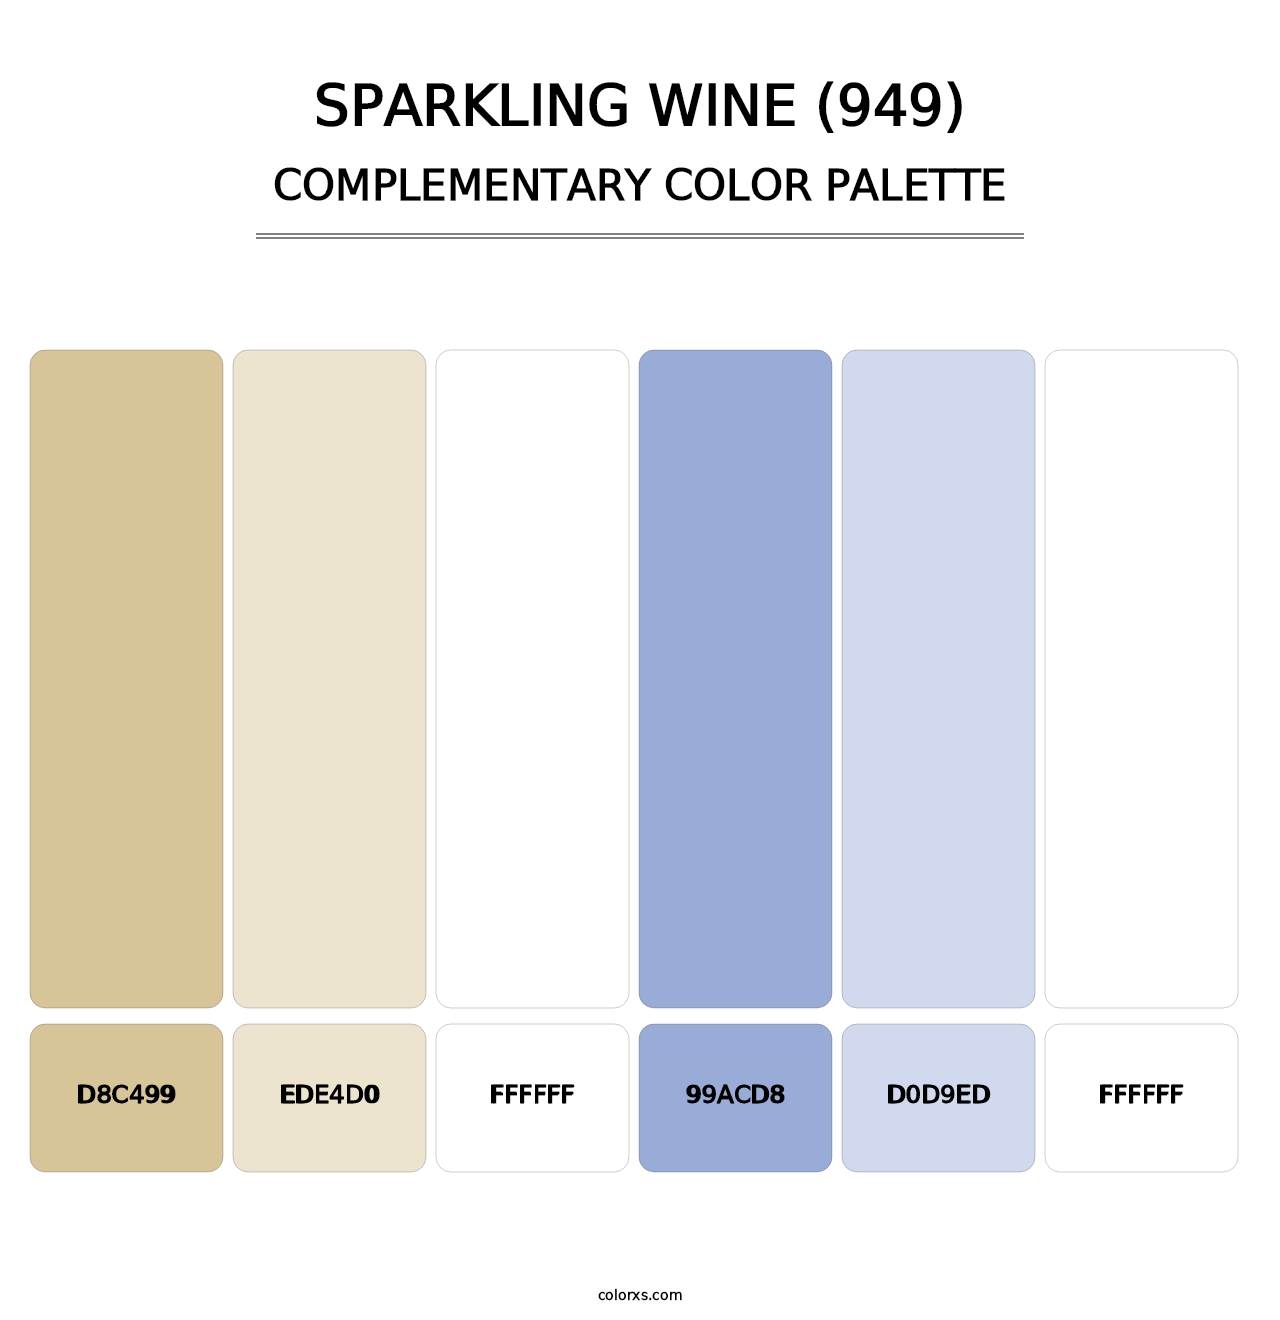 Sparkling Wine (949) - Complementary Color Palette